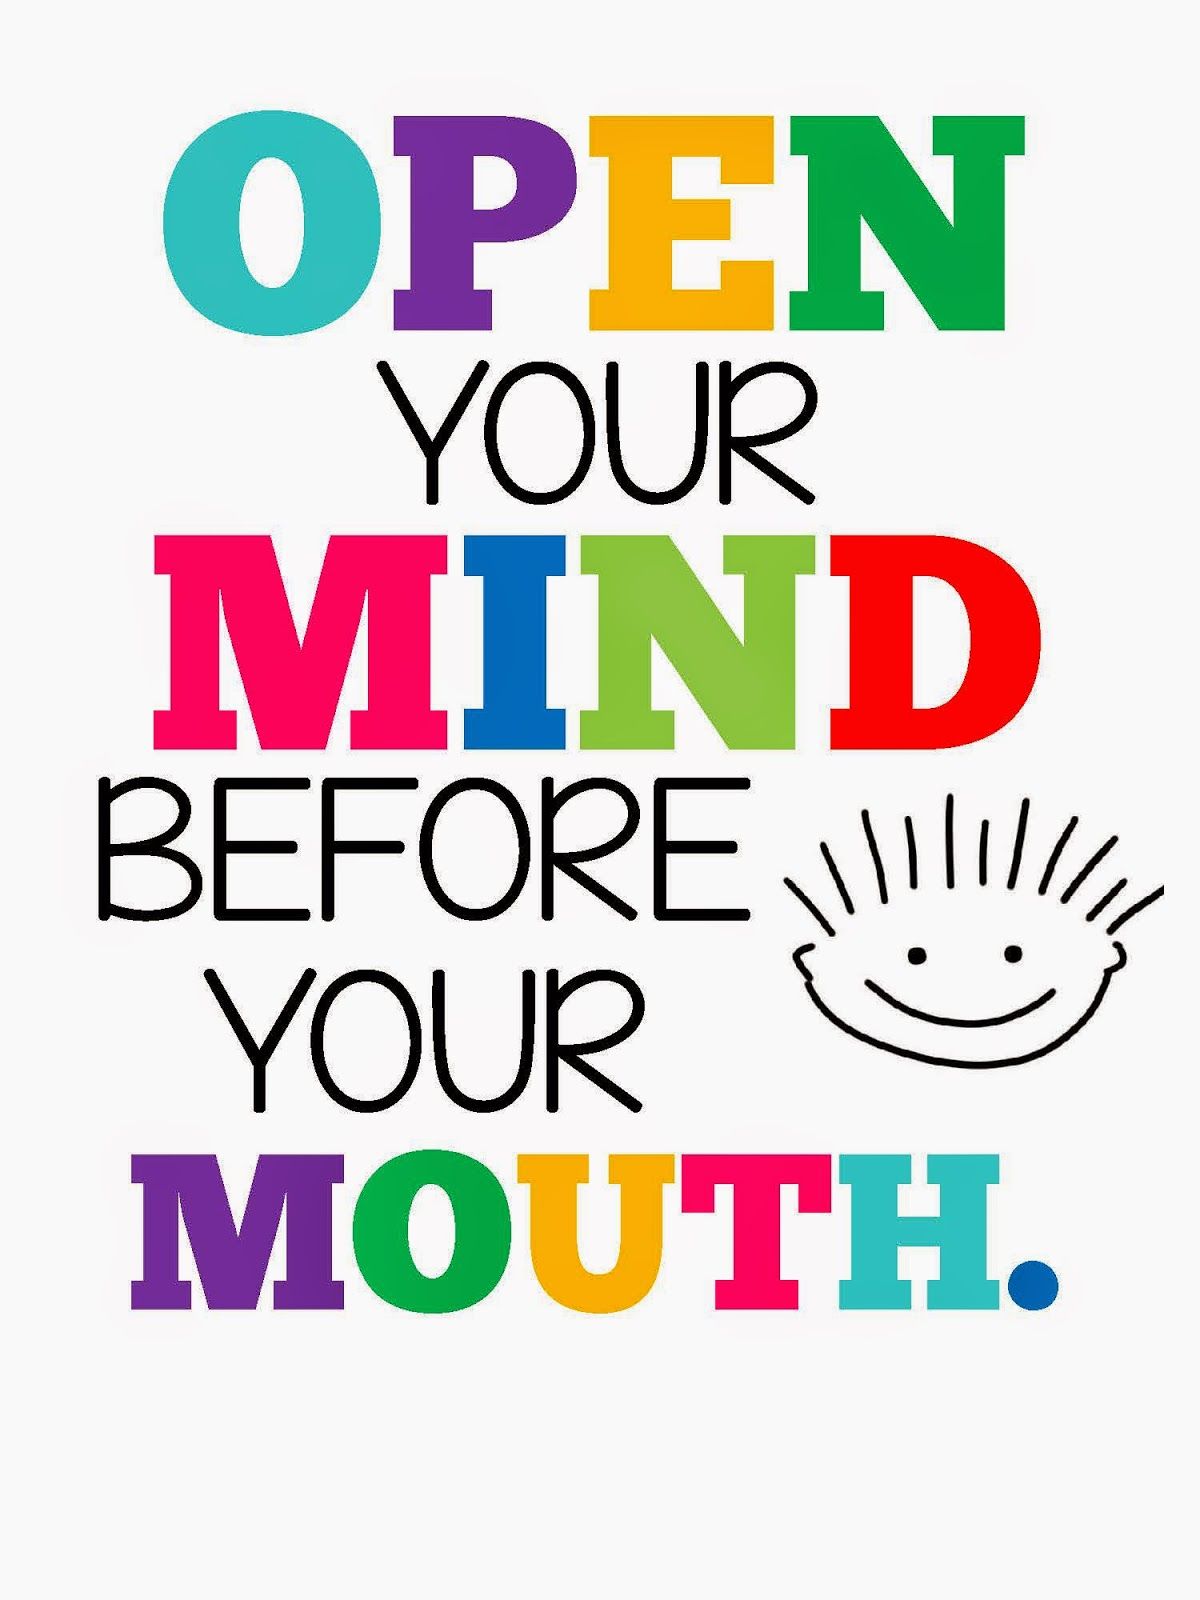 Open your mind before your mouth